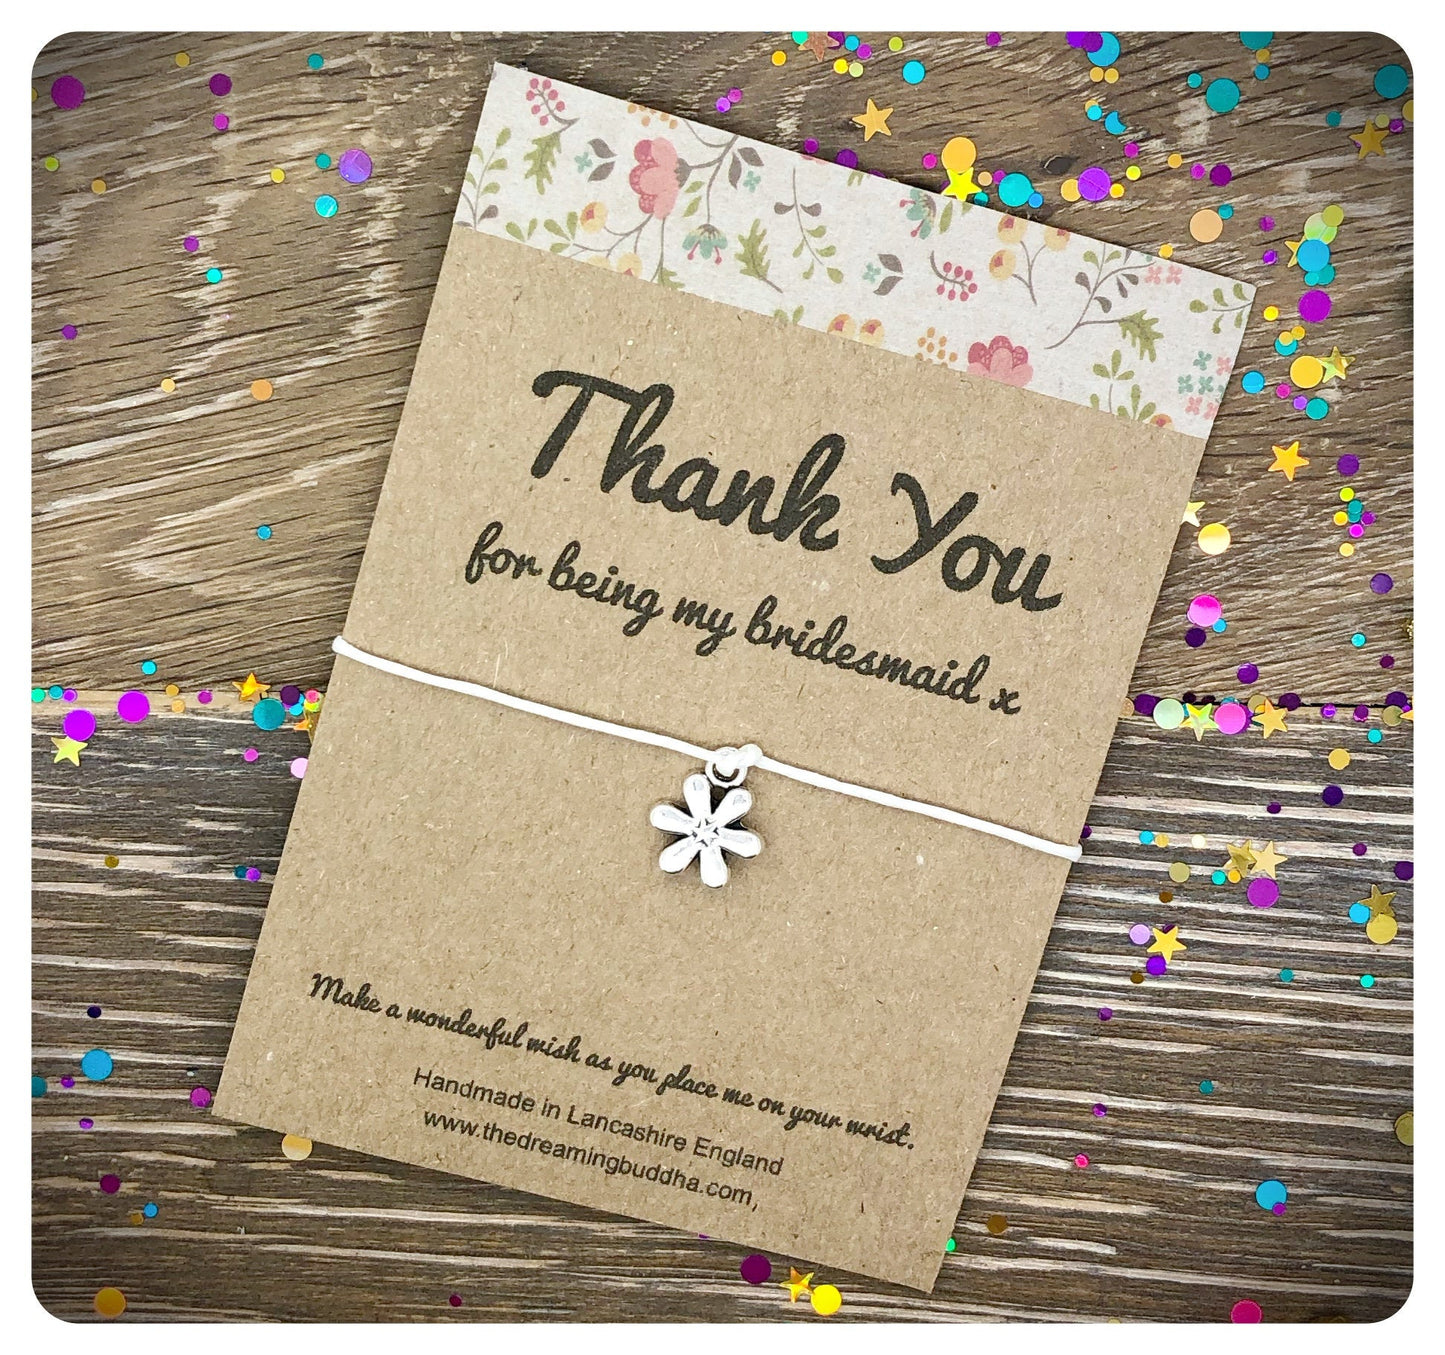 Thank You For Being Our Bridesmaid Card, Small Bridesmaid Gift, Flower Wish Bracelet Present For Bridesmaid